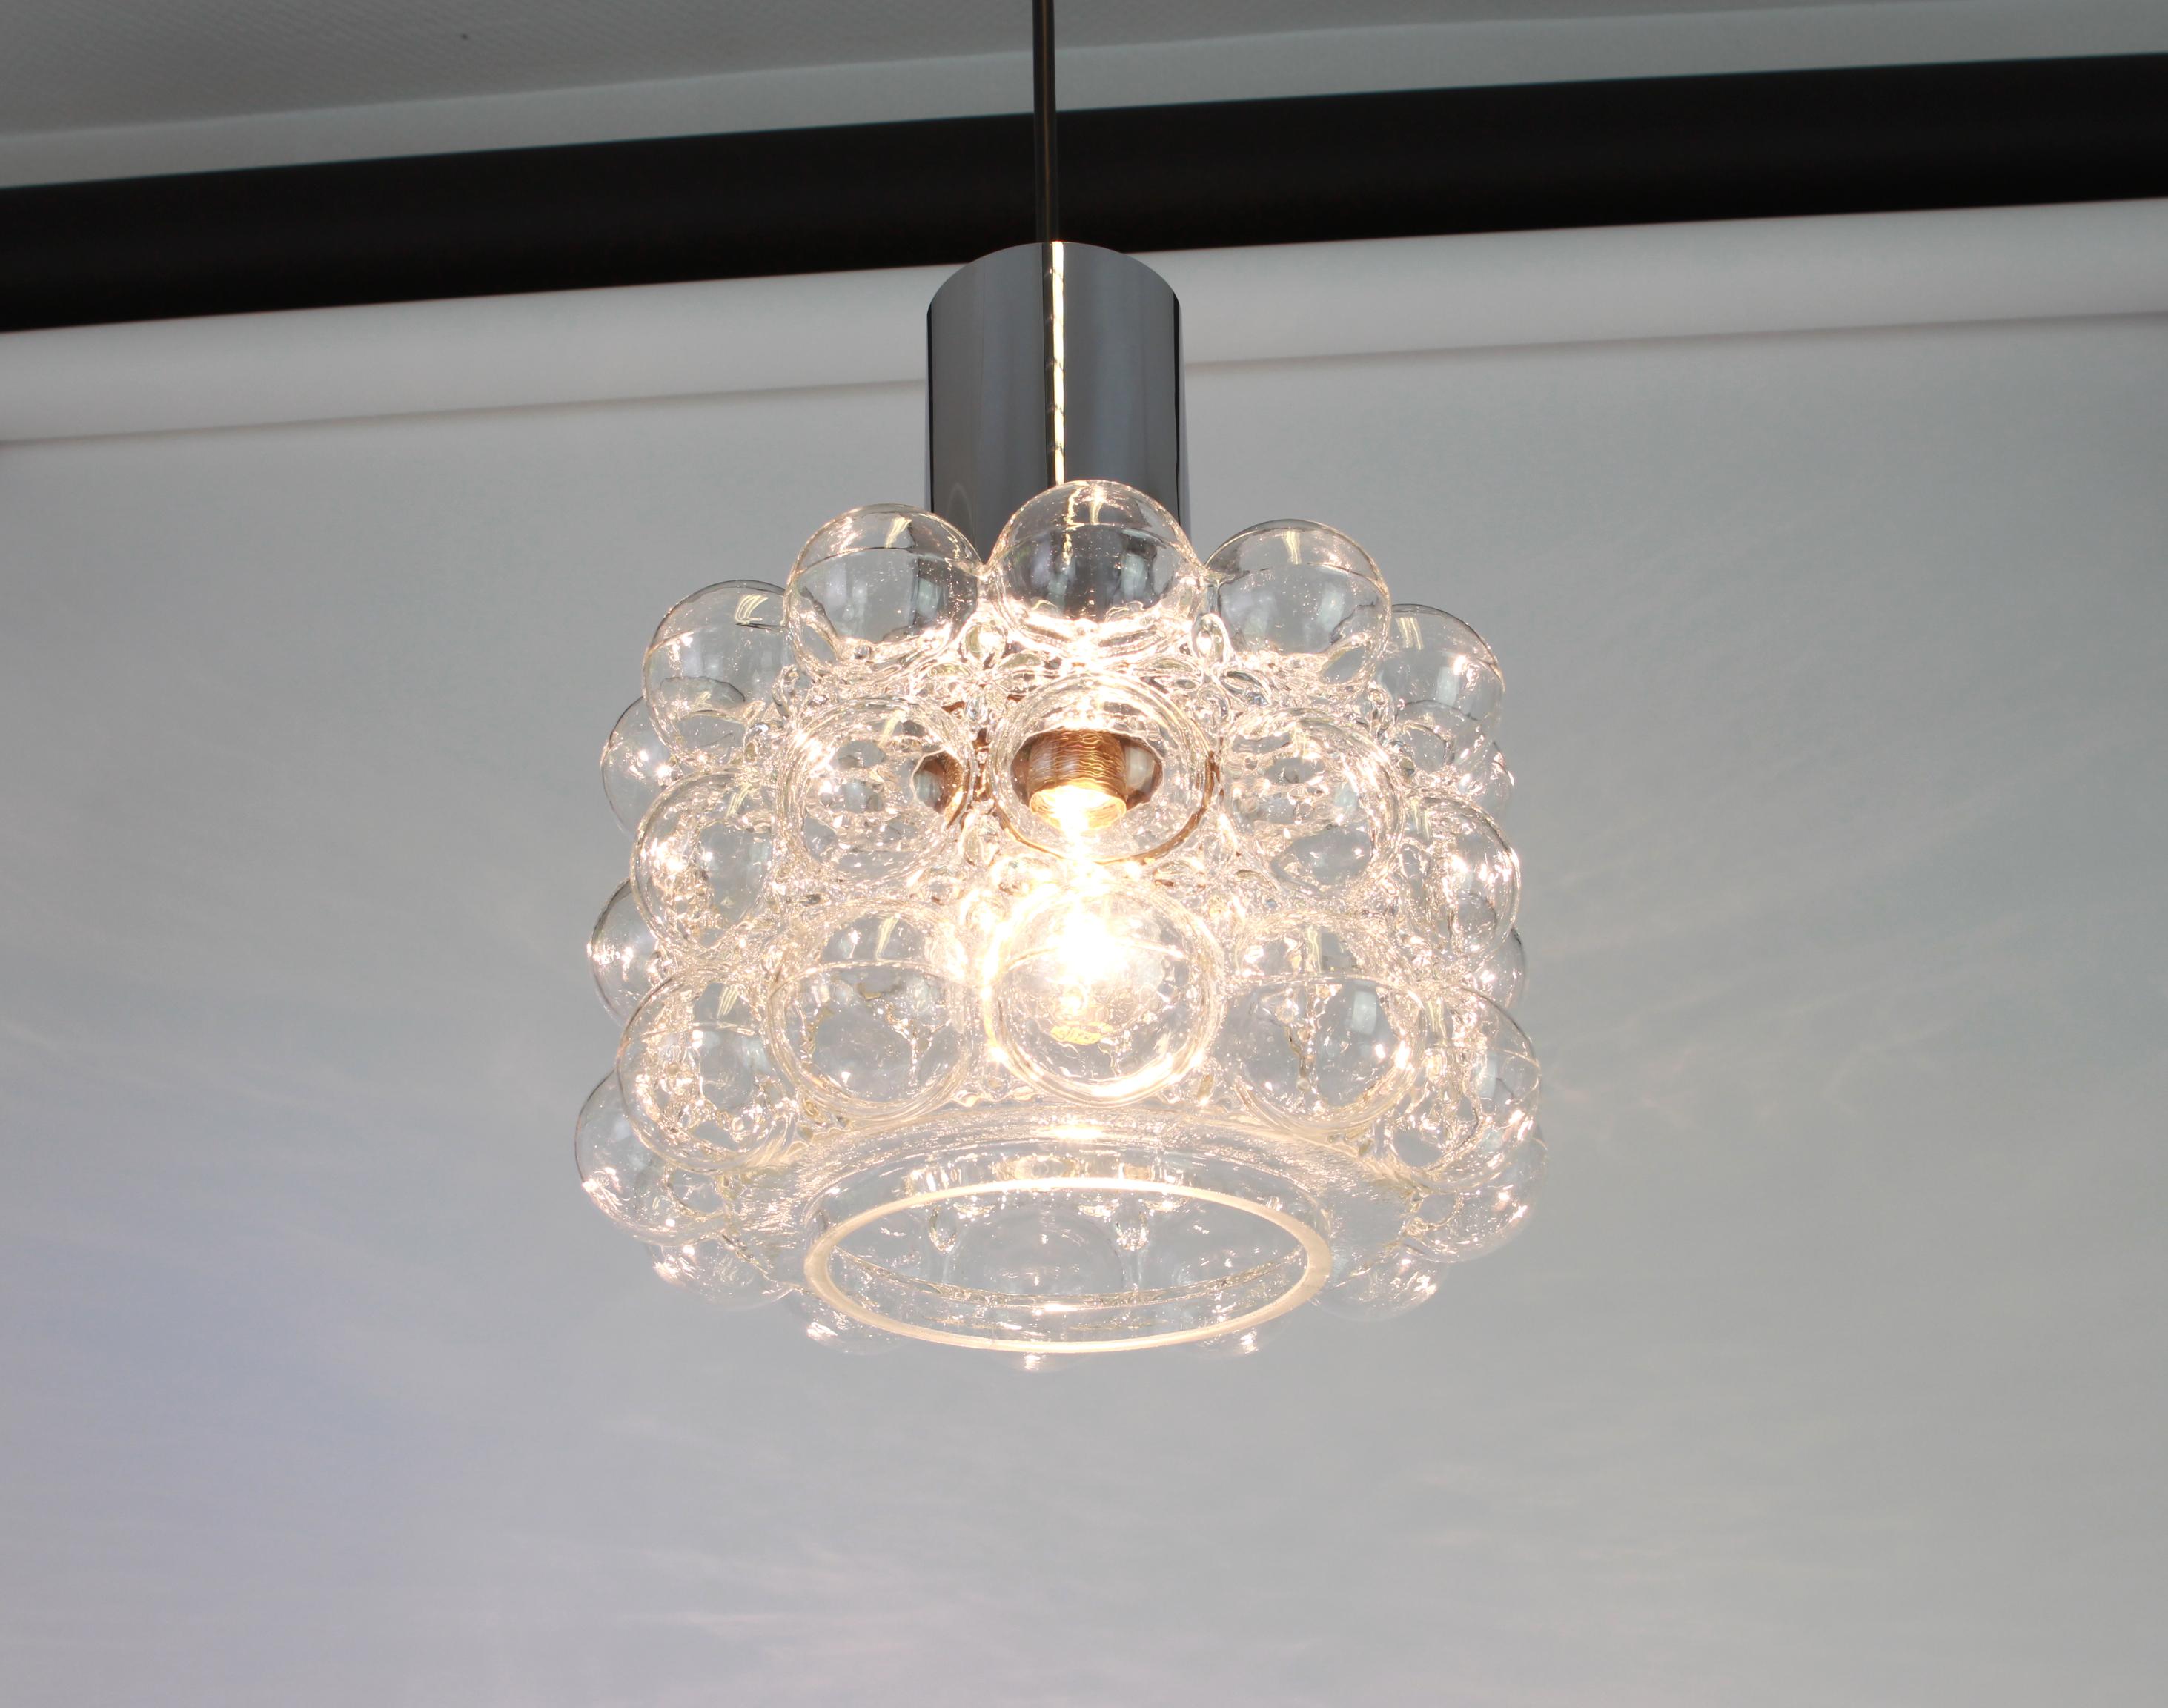 A large round bubble glass pendant designed by Helena Tynell for Limburg, manufactured in Germany, circa 1970s.

Sockets: needs 1 x E27 standard bulb with 100W max each and compatible with the US/UK/ etc standards
Good condition- small tiny hit